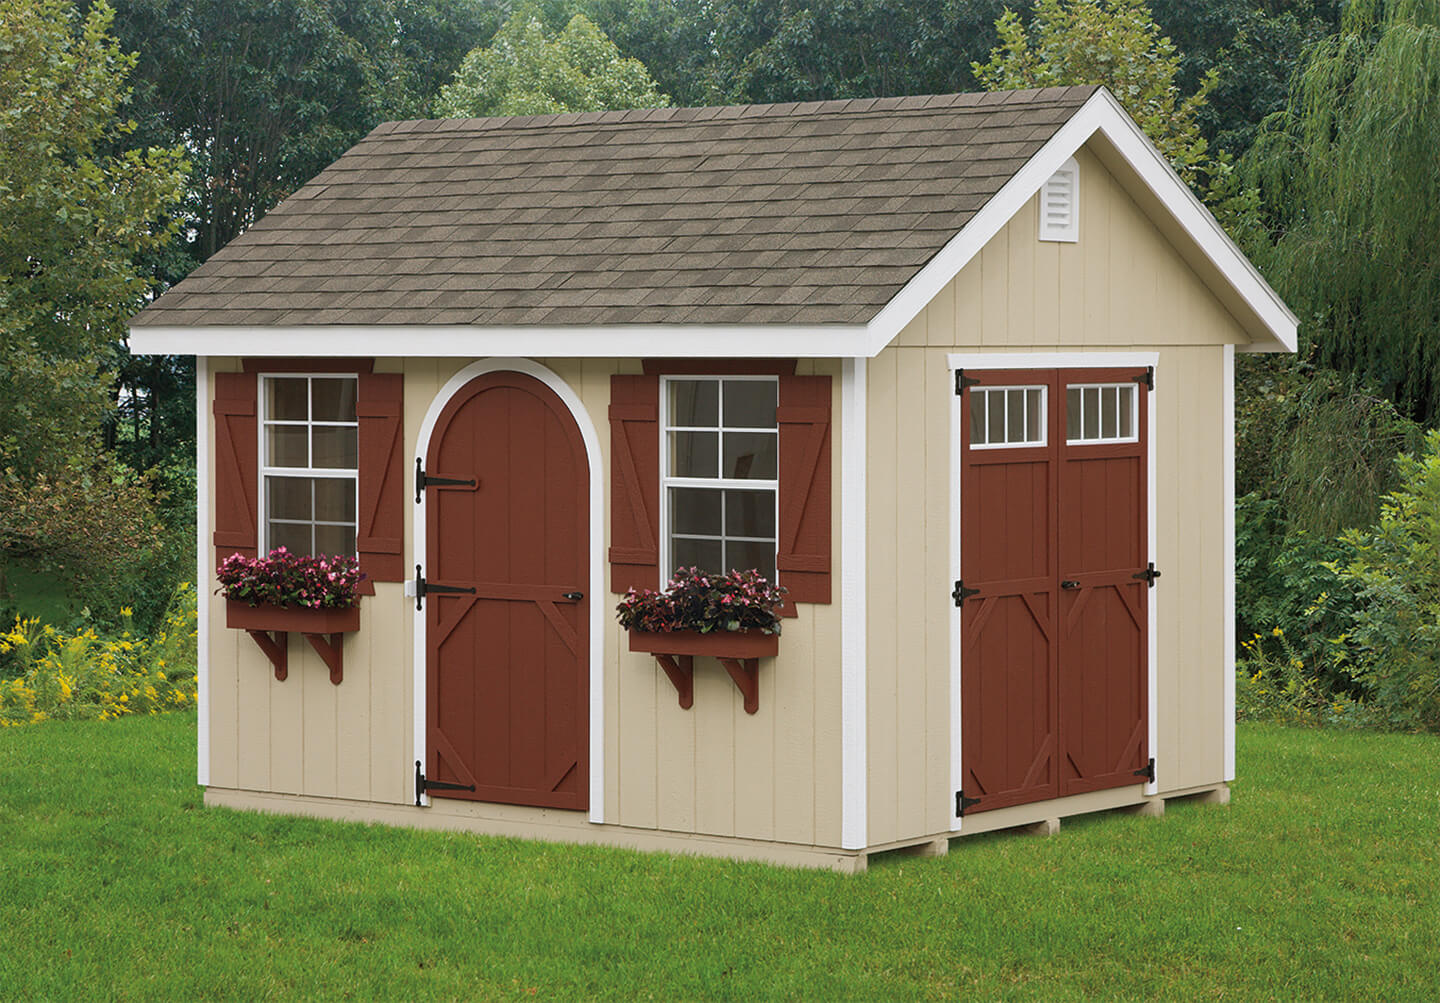 Read reviews and buy the best outdoor storage sheds from top brands includi...